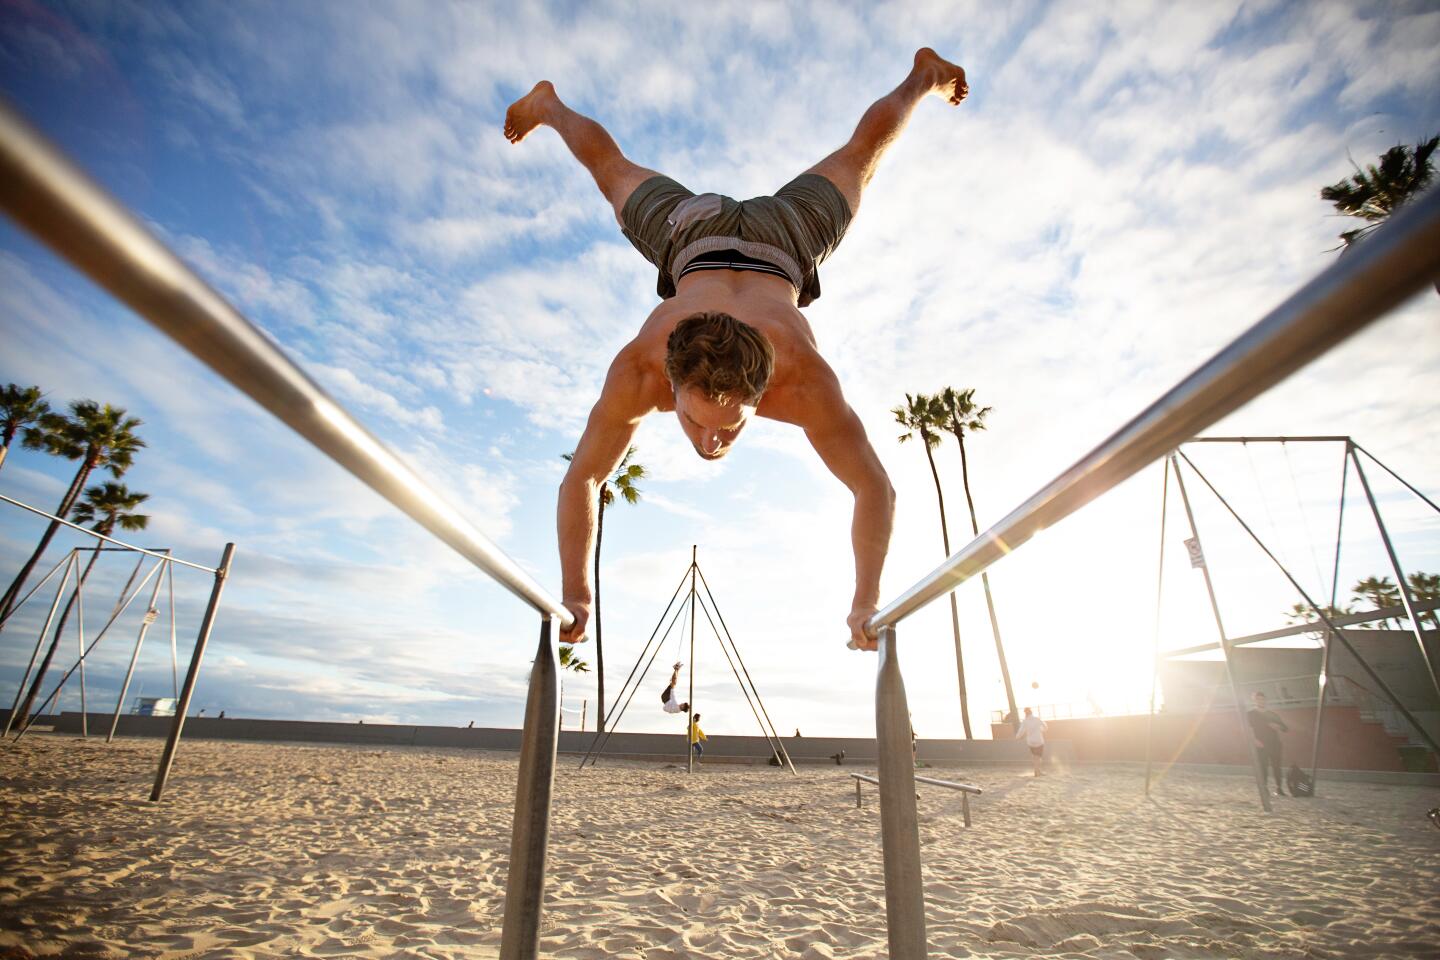 Brian Comstock, 29, of Venice does a handstand at Muscle Beach at Venice beach on Thursday.